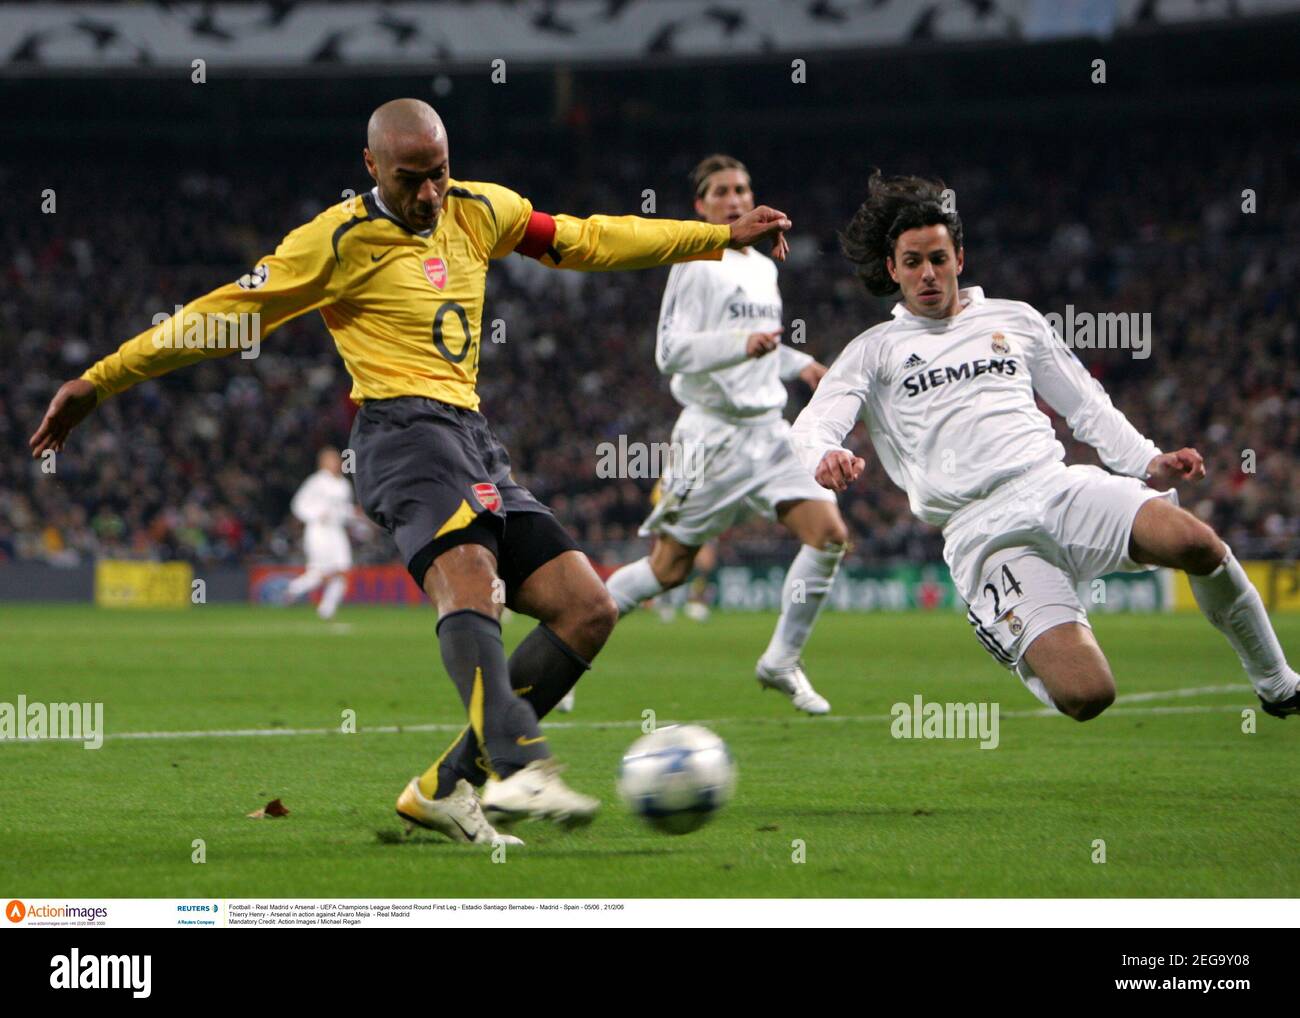 Football - Real Madrid v Arsenal - UEFA Champions League Second Round First  Leg - Estadio Santiago Bernabeu - Madrid - Spain - 05/06 , 21/2/06 Thierry  Henry - Arsenal in action